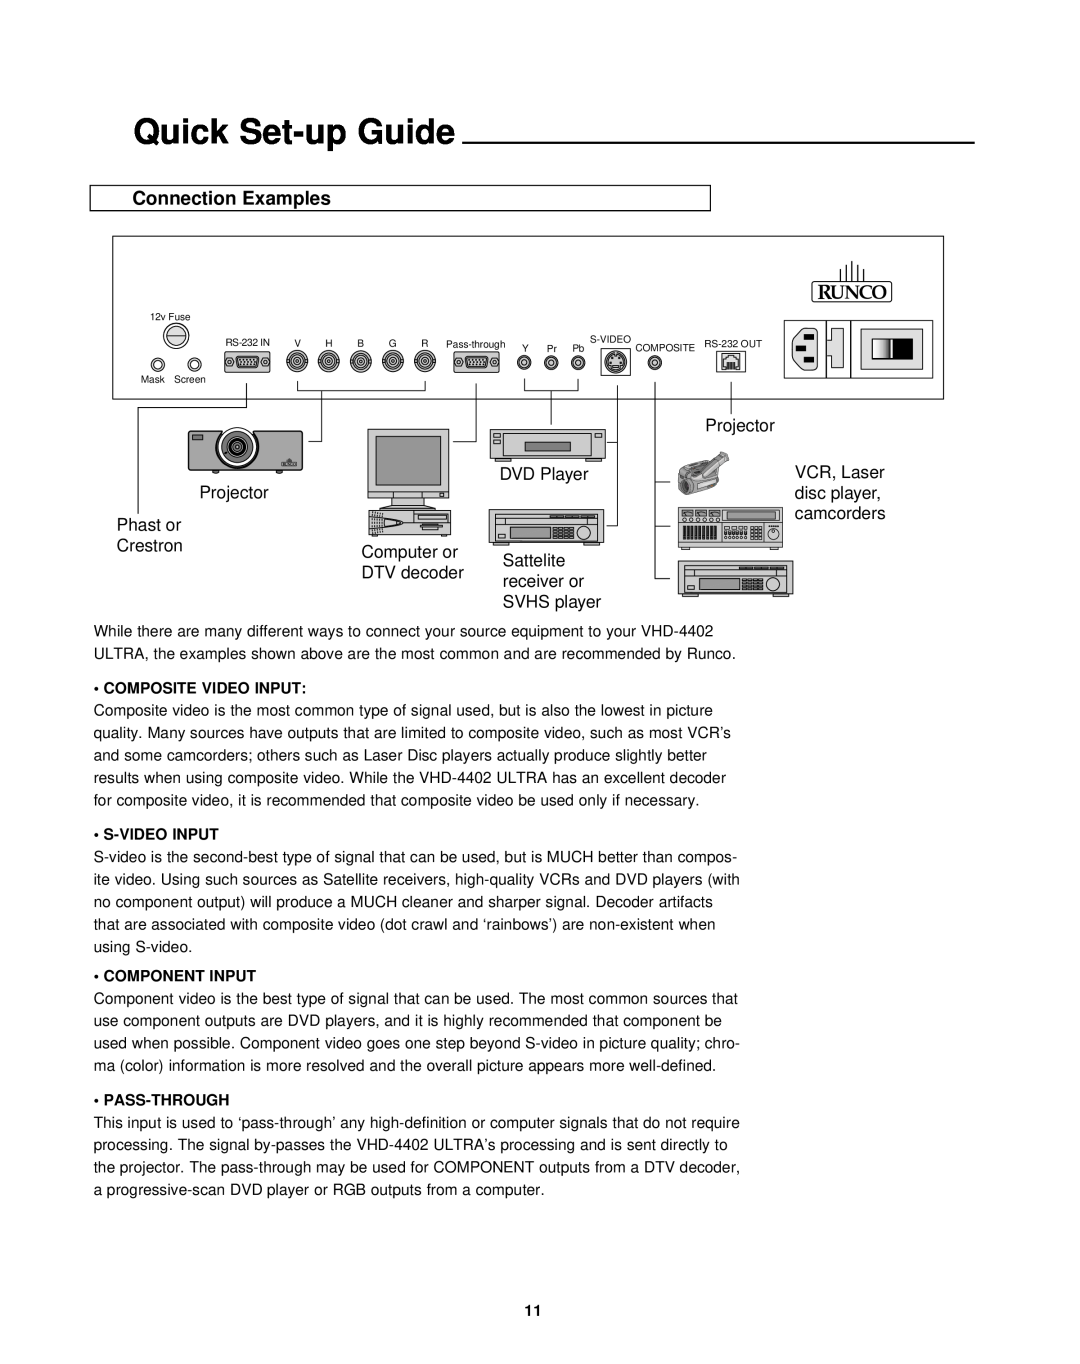 Runco virtual high definition processor with aspect ratio control, VHD-4402 Quick Set-up Guide, Connection Examples, Runco 